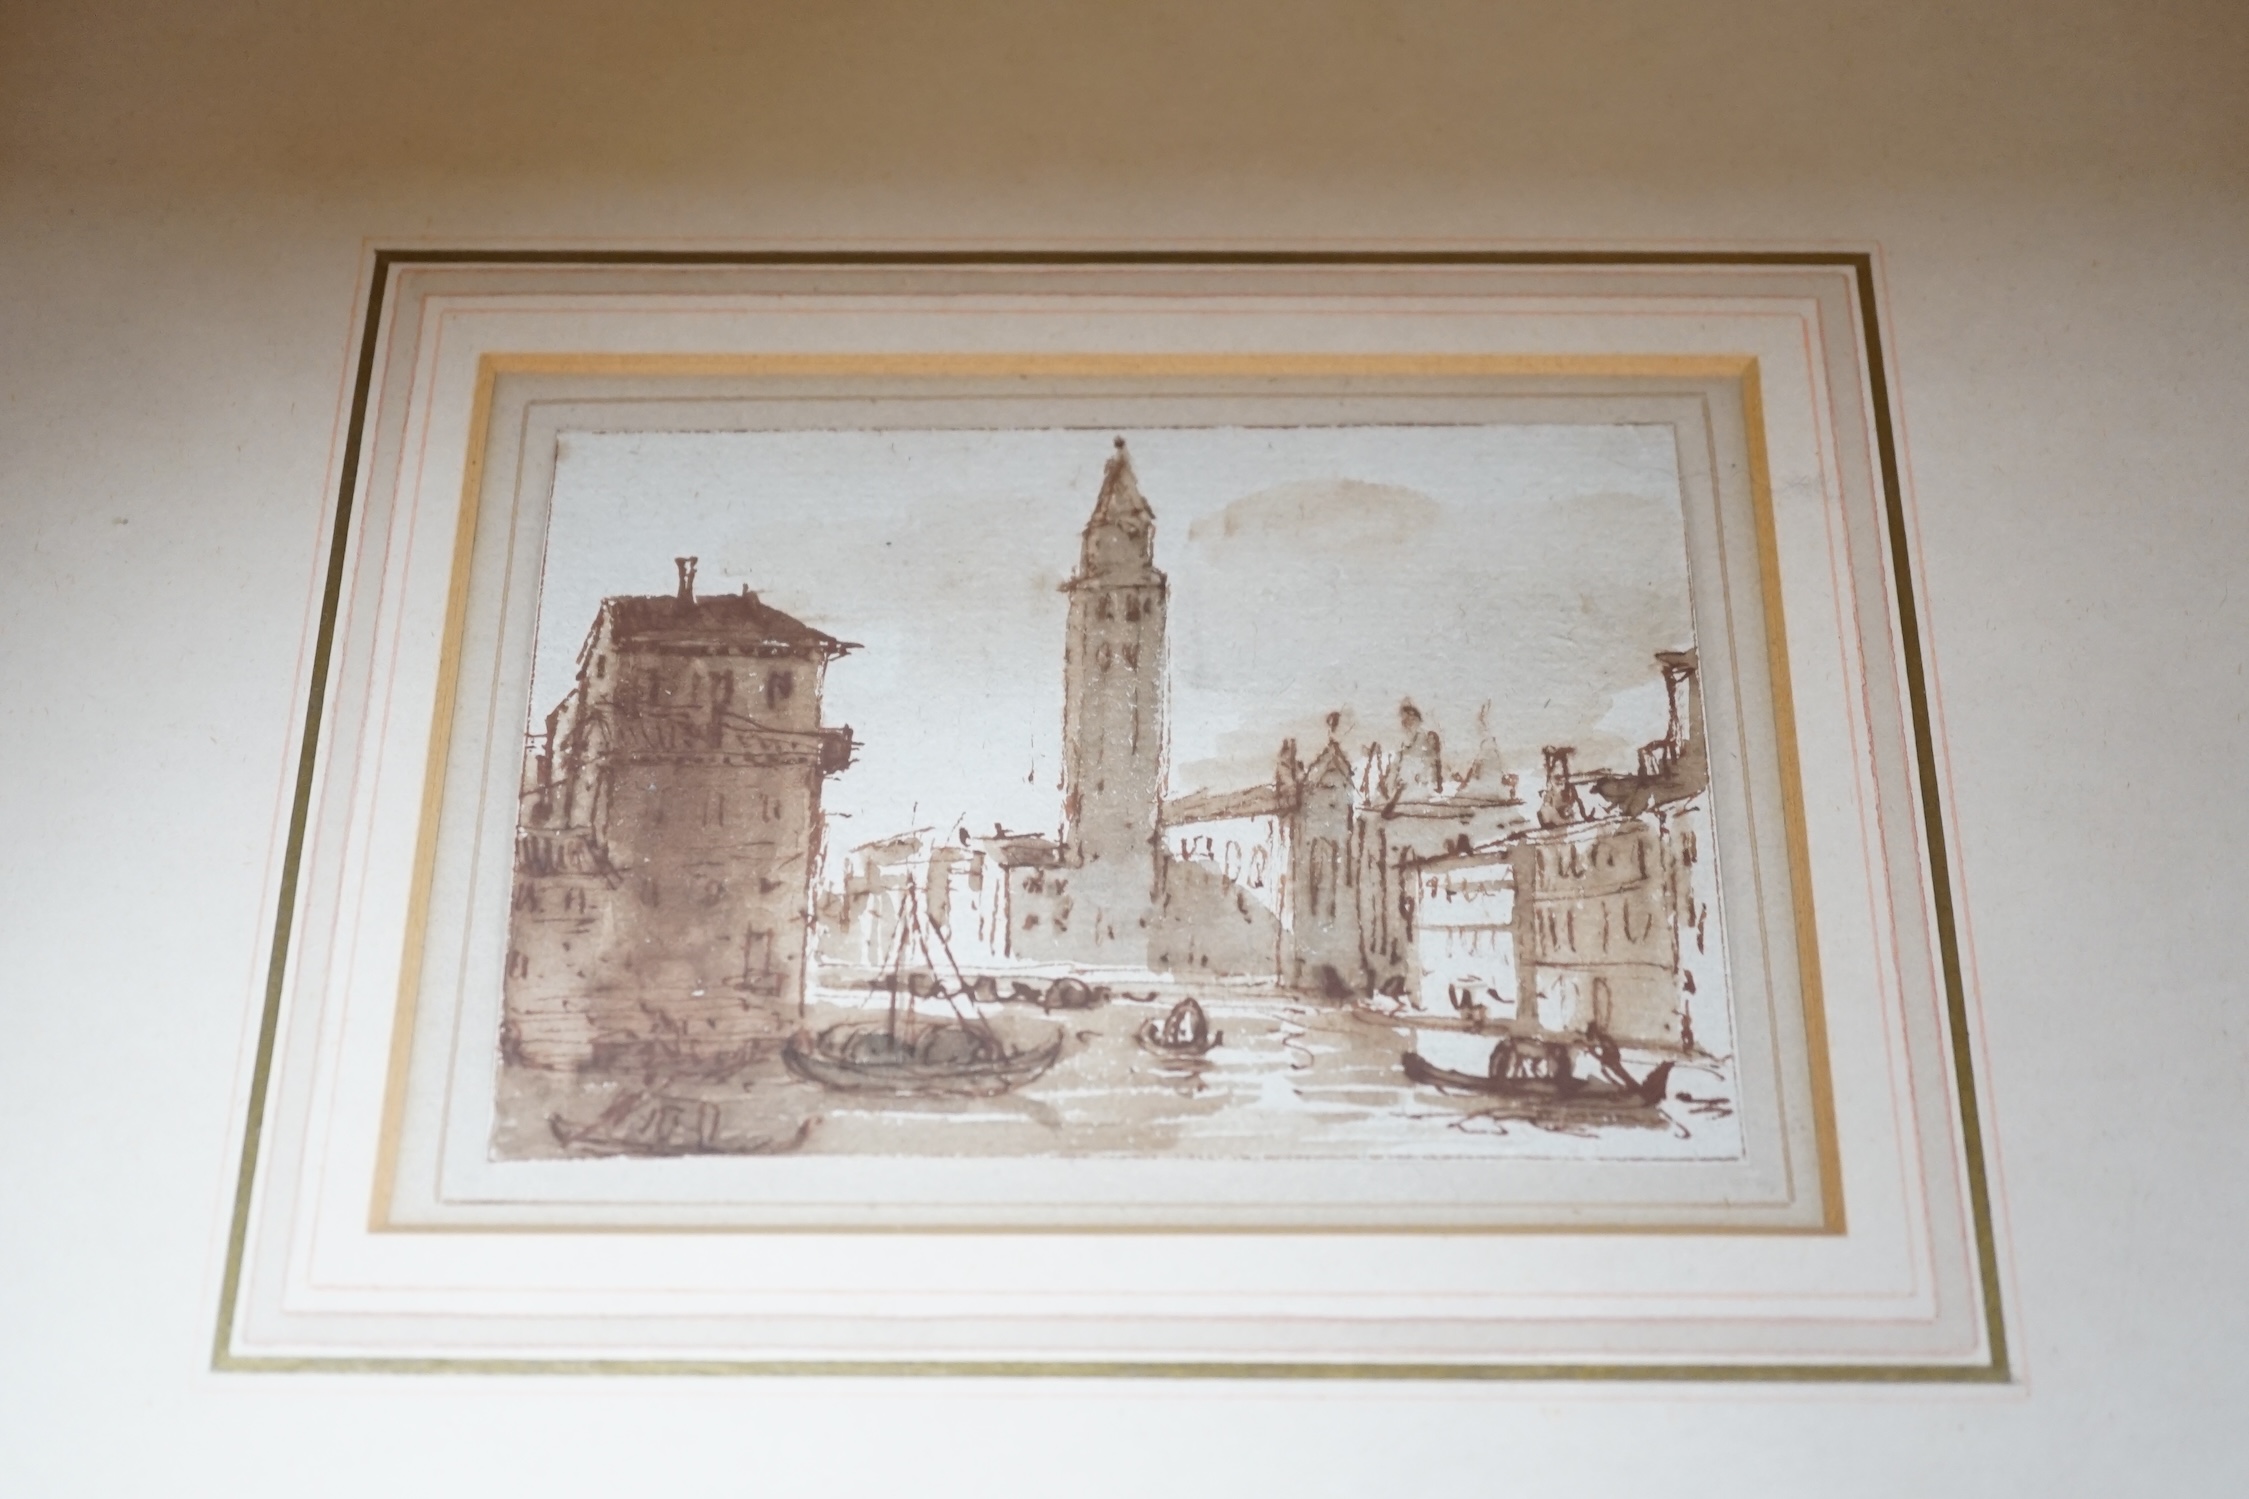 Four 18th/19th century sepia pen and ink sketches, Venetian scenes including 'La douane de mer a Venise', largest 10.5 x 14cm. Condition - fair, discolouration and foxing throughout commensurate with age